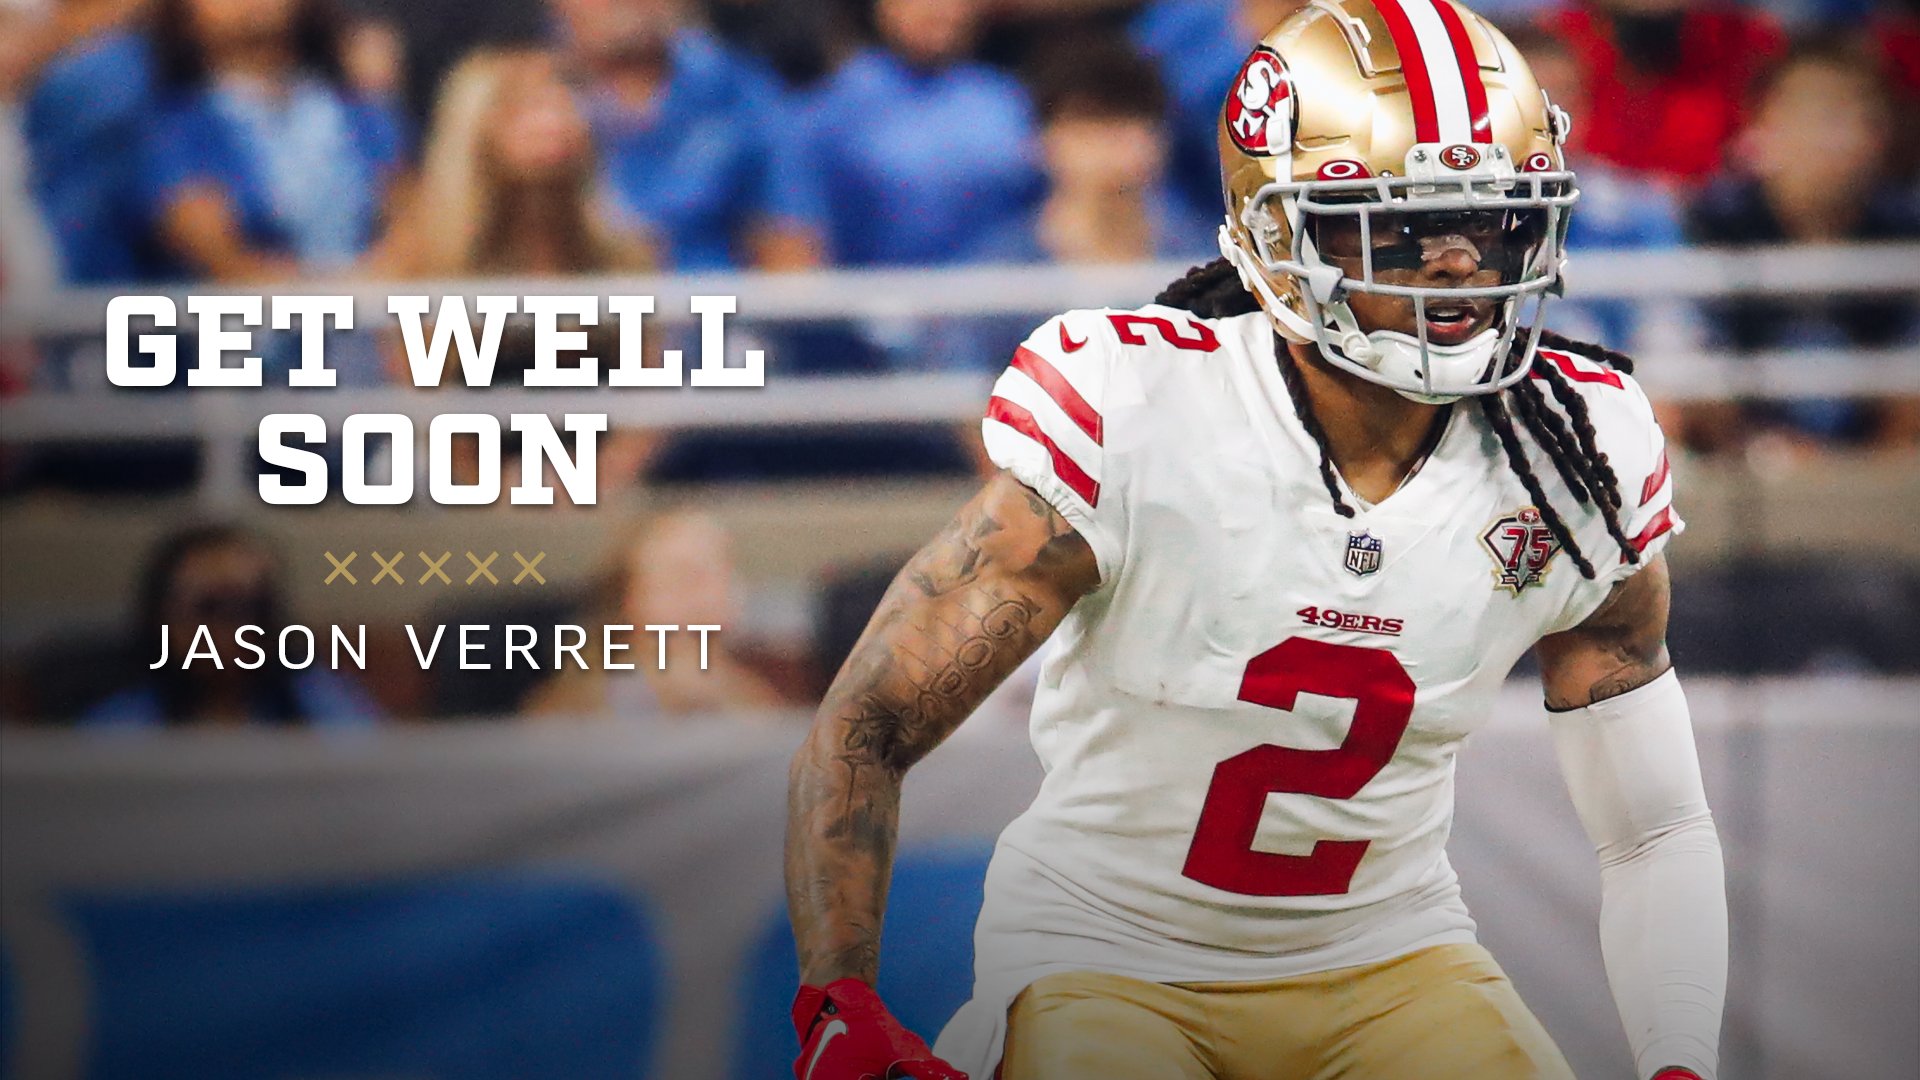 San Francisco 49ers on X: 'The team announced today that CB Jason Verrett  tore his achilles tendon in practice yesterday and is out for the season.  Prayers up for JV ❤️